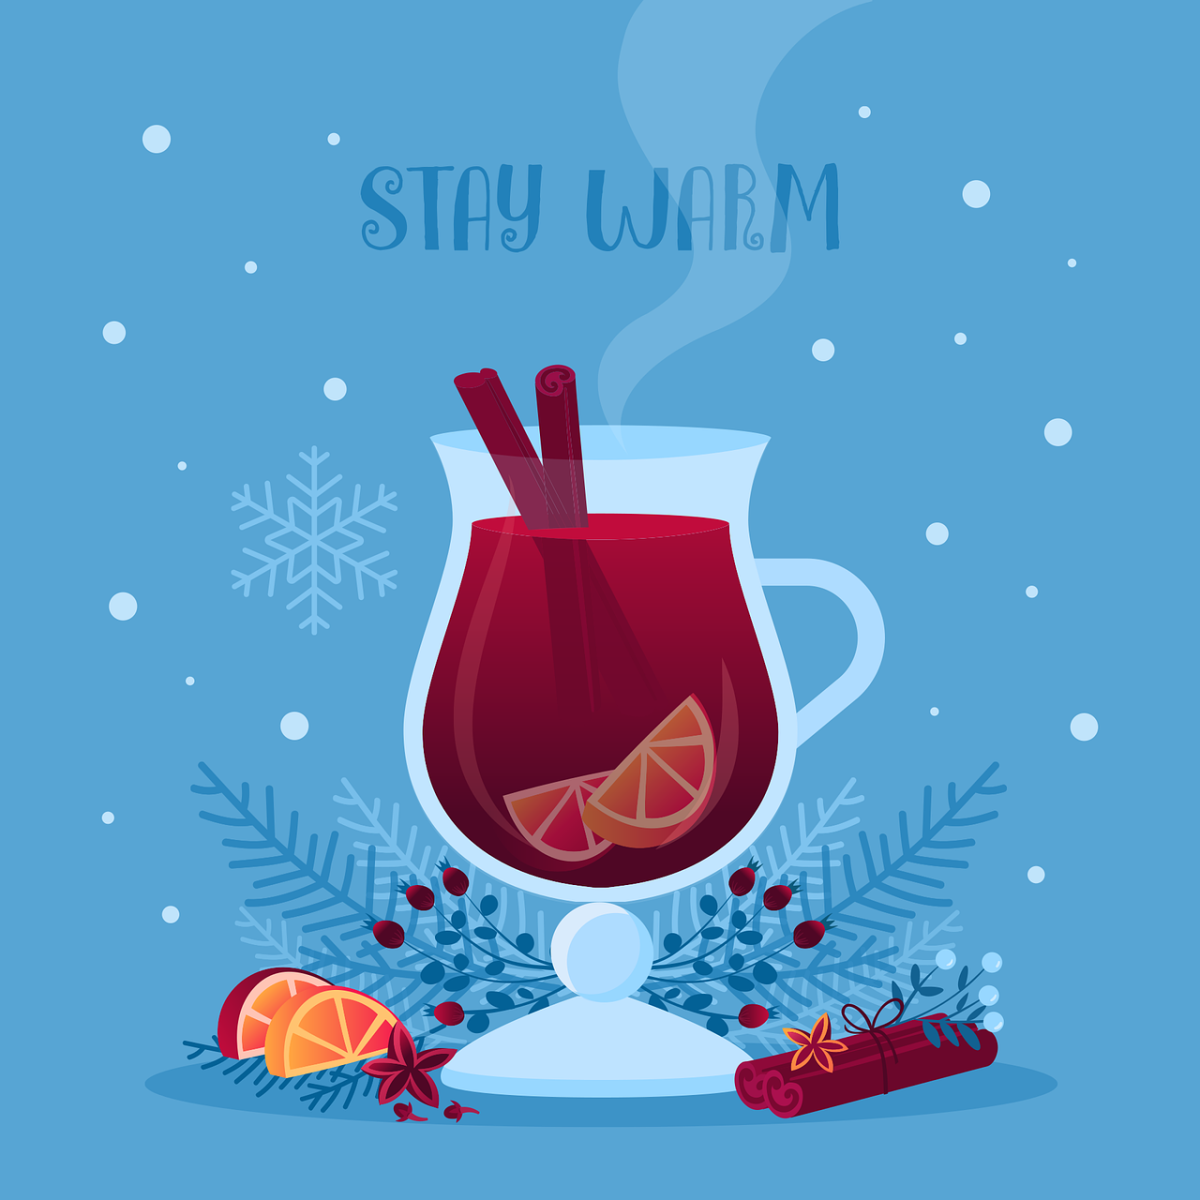 Stay warm with red wine, cinnamon and fruits.